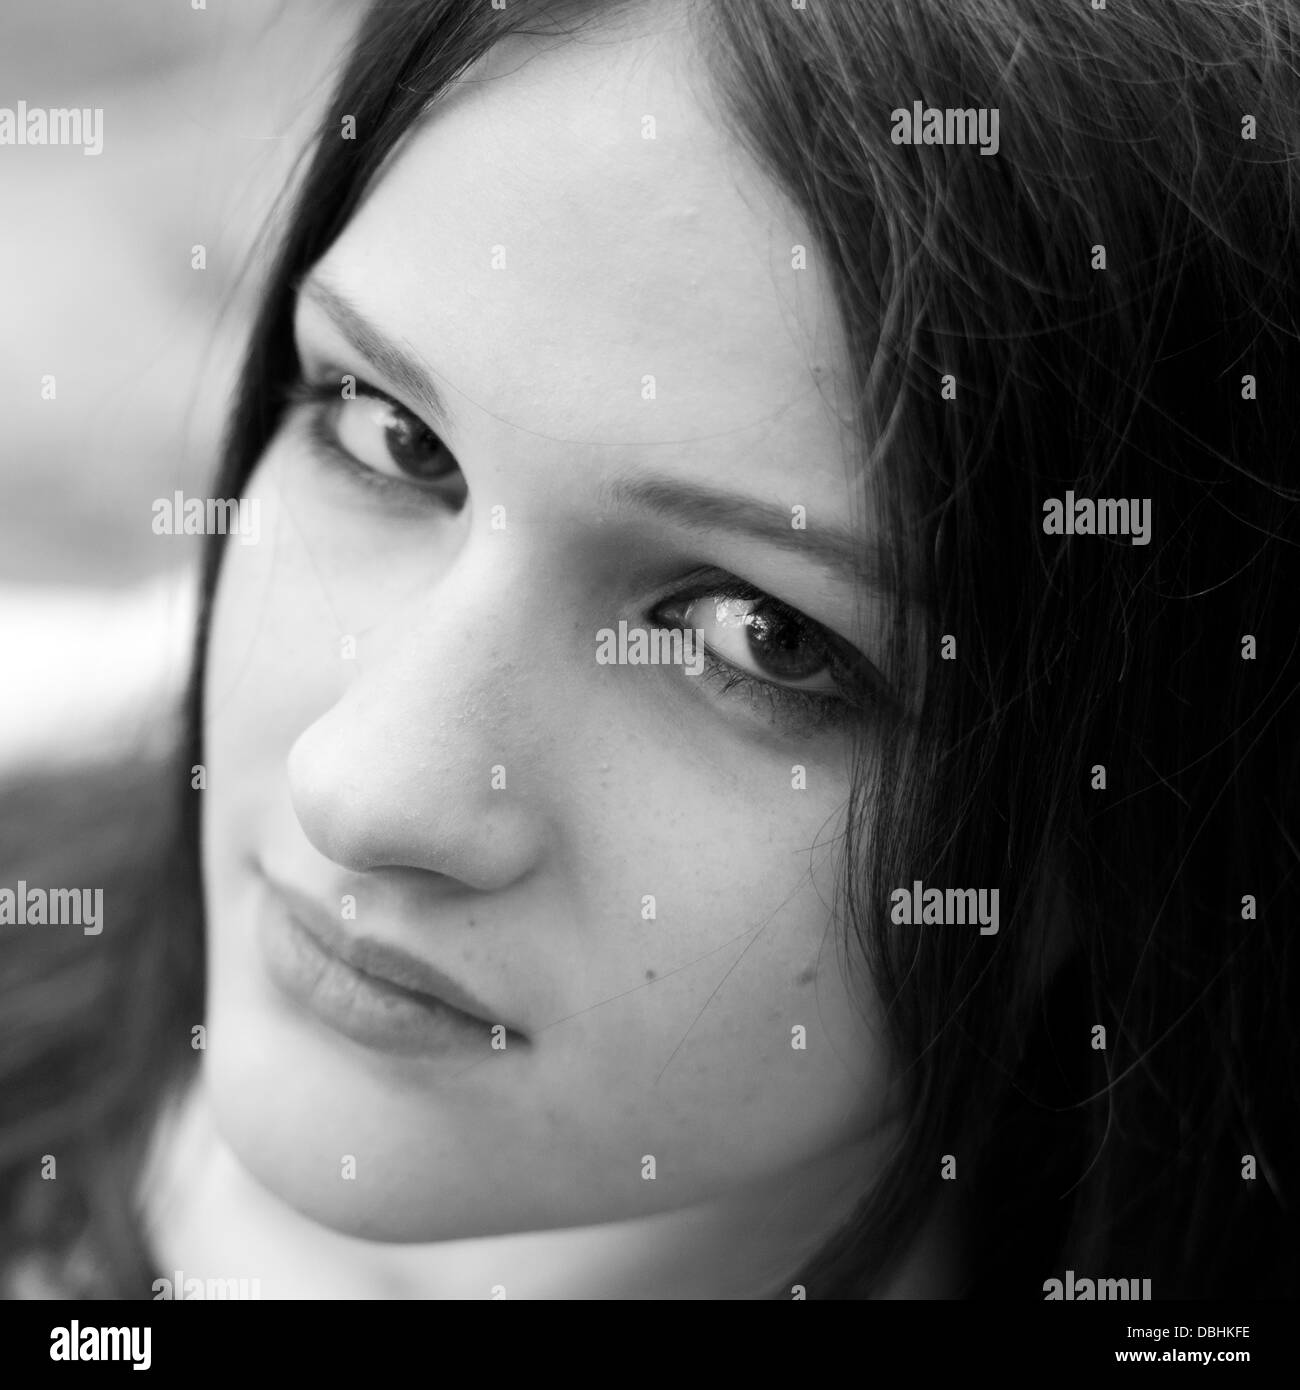 Black and white portrait of a teenage girl. Stock Photo